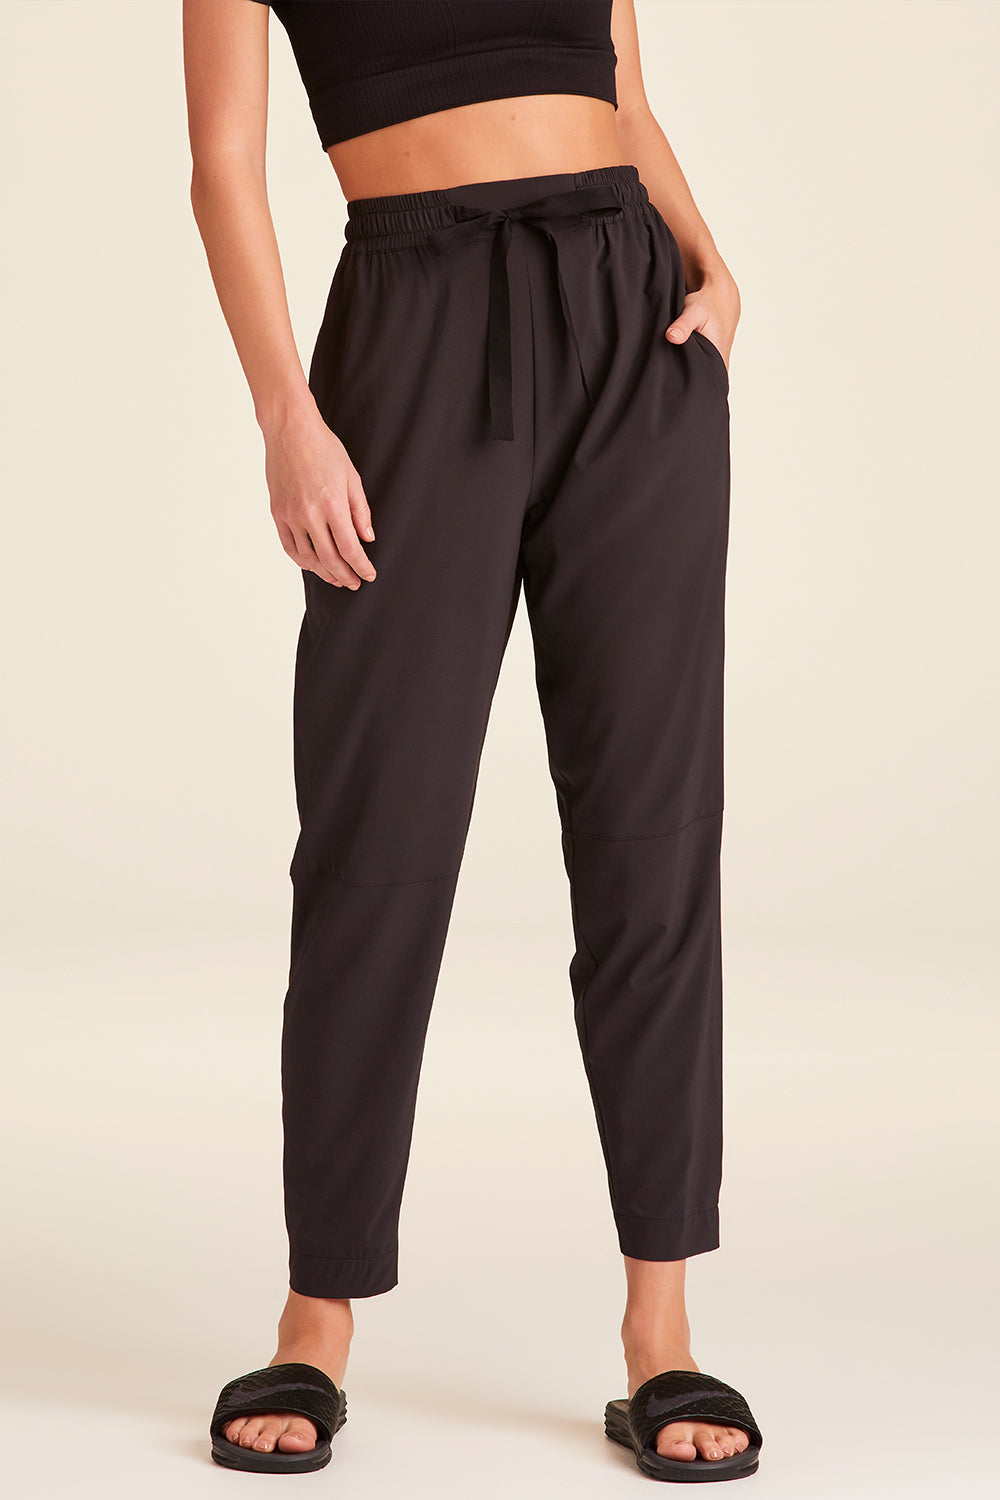 High Waisted Pants Women, Tapered Trousers Womens, Cigarette Pants